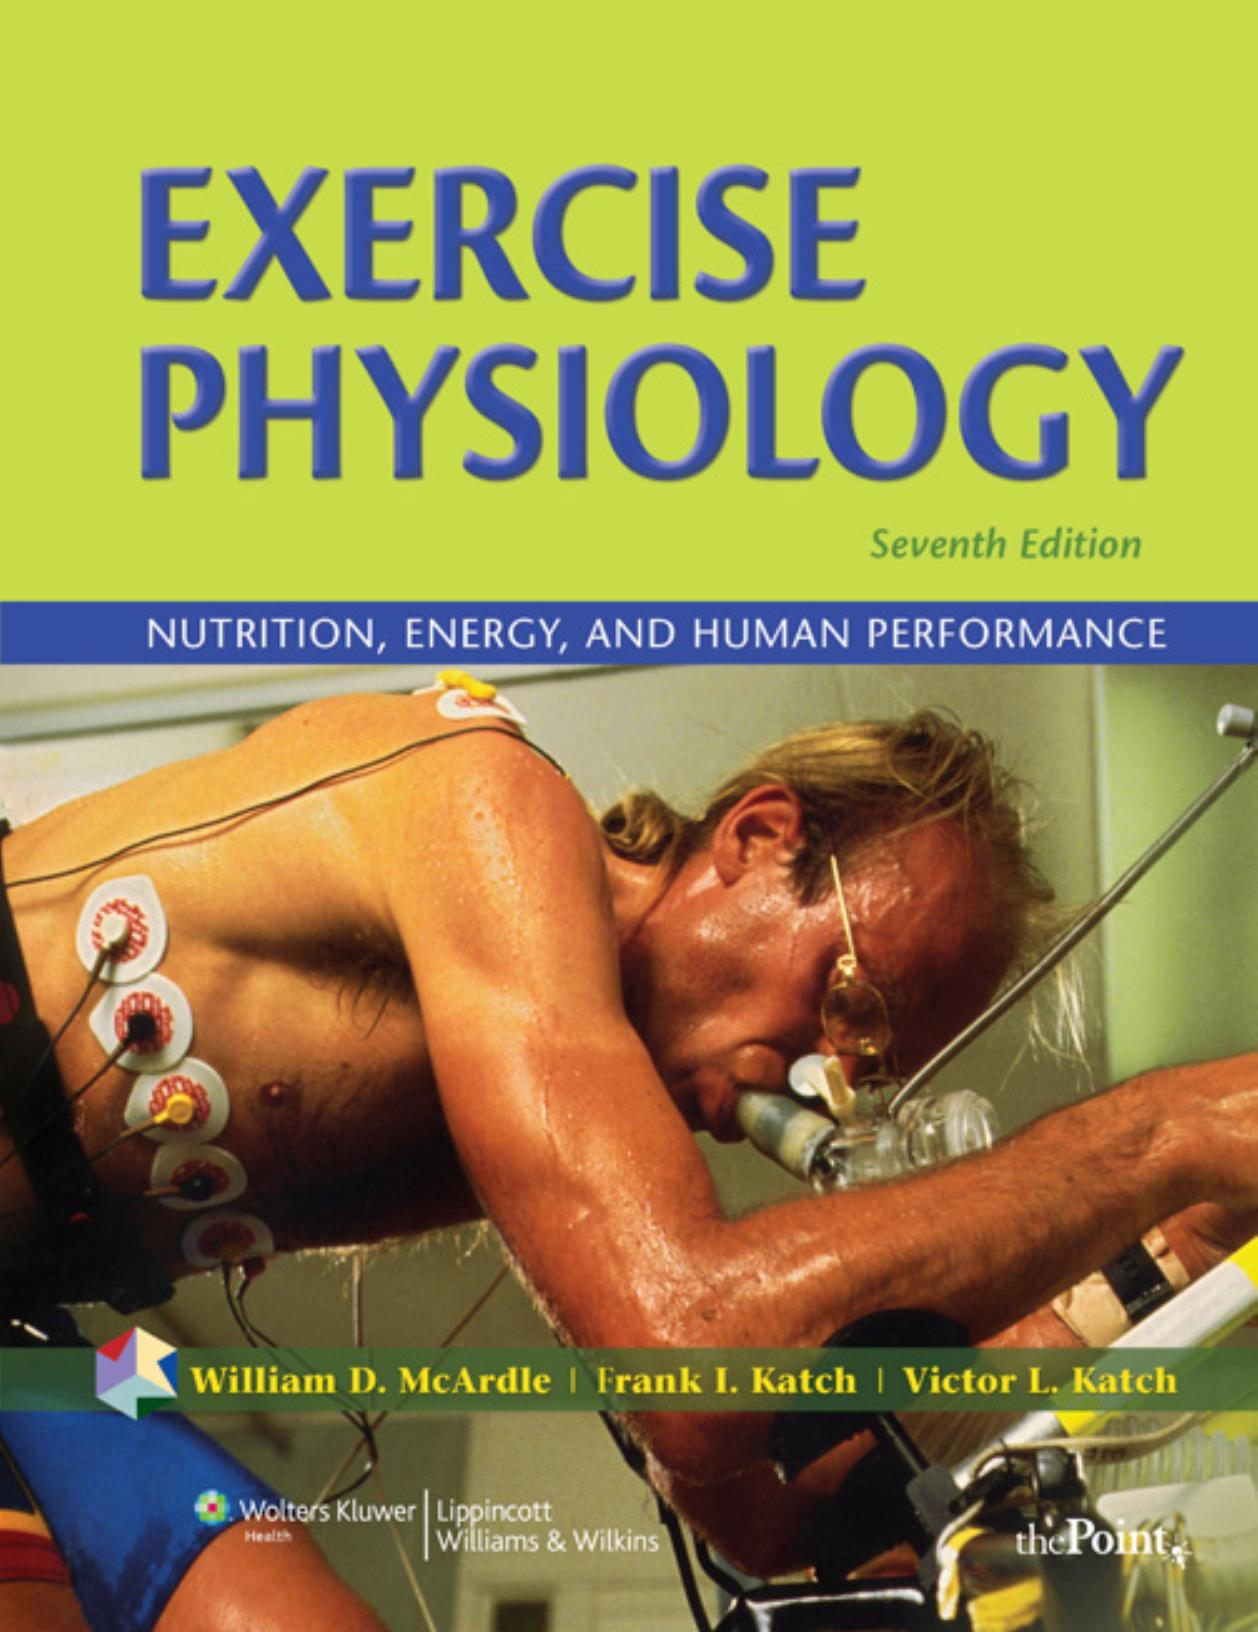 Exercise physiology  Nutrition, energy, and human performance 2010